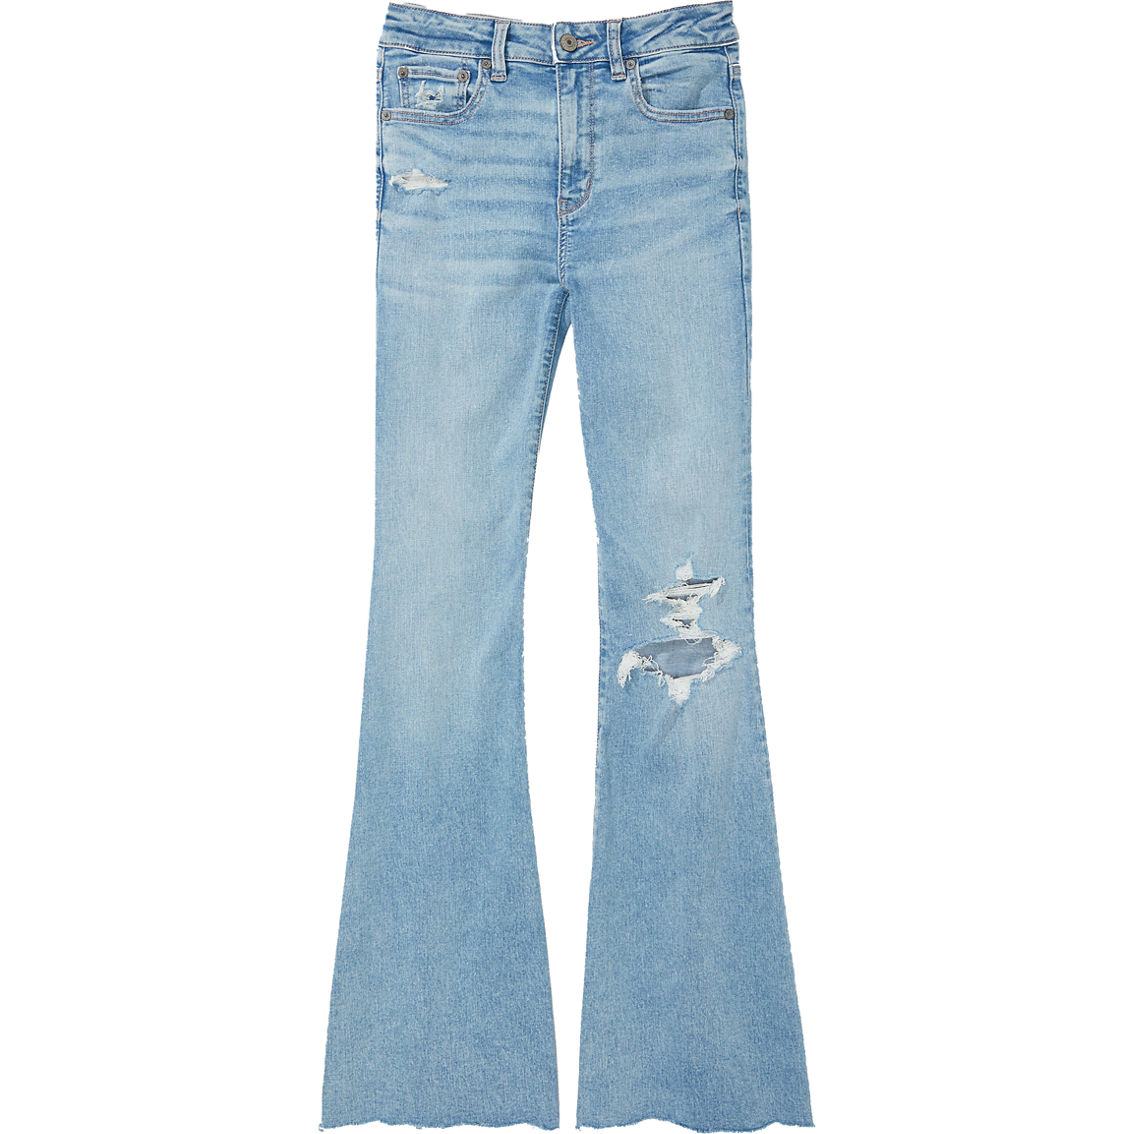 American Eagle Next Level Ripped High Rise Flare Jeans - Image 4 of 5